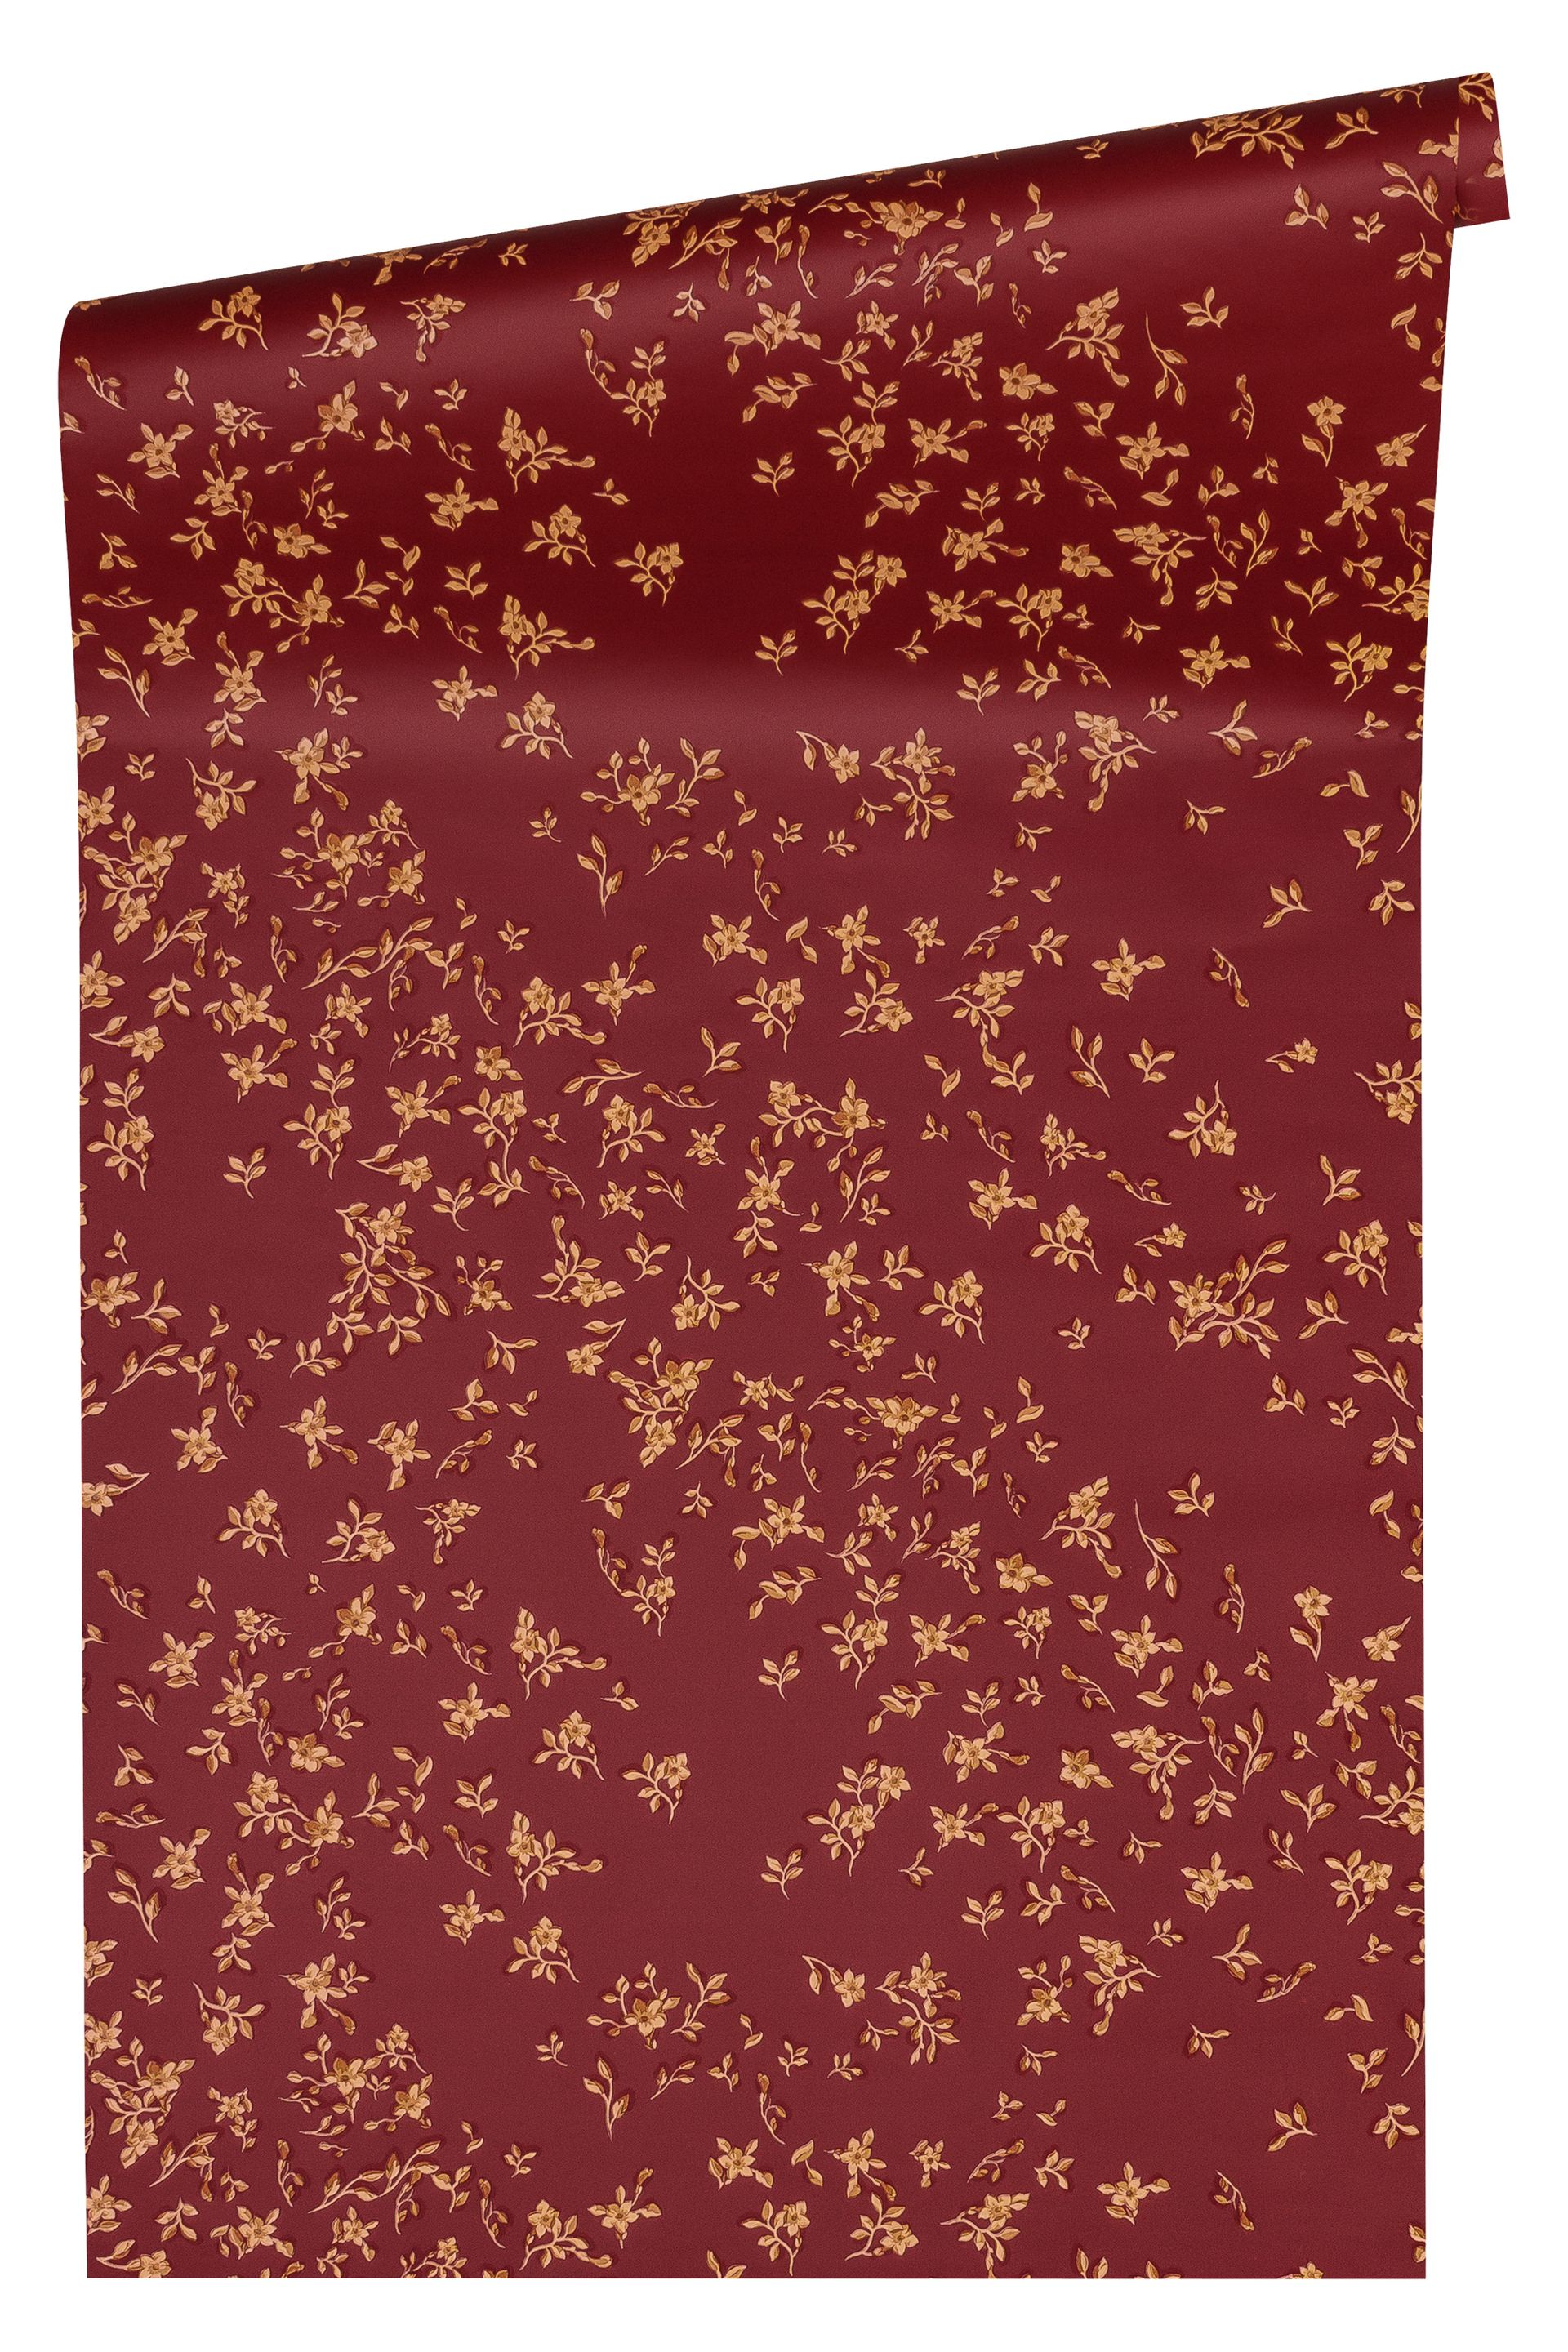 Versace wallpaper Versace 4, Florale Tapete, rot, gold 935857